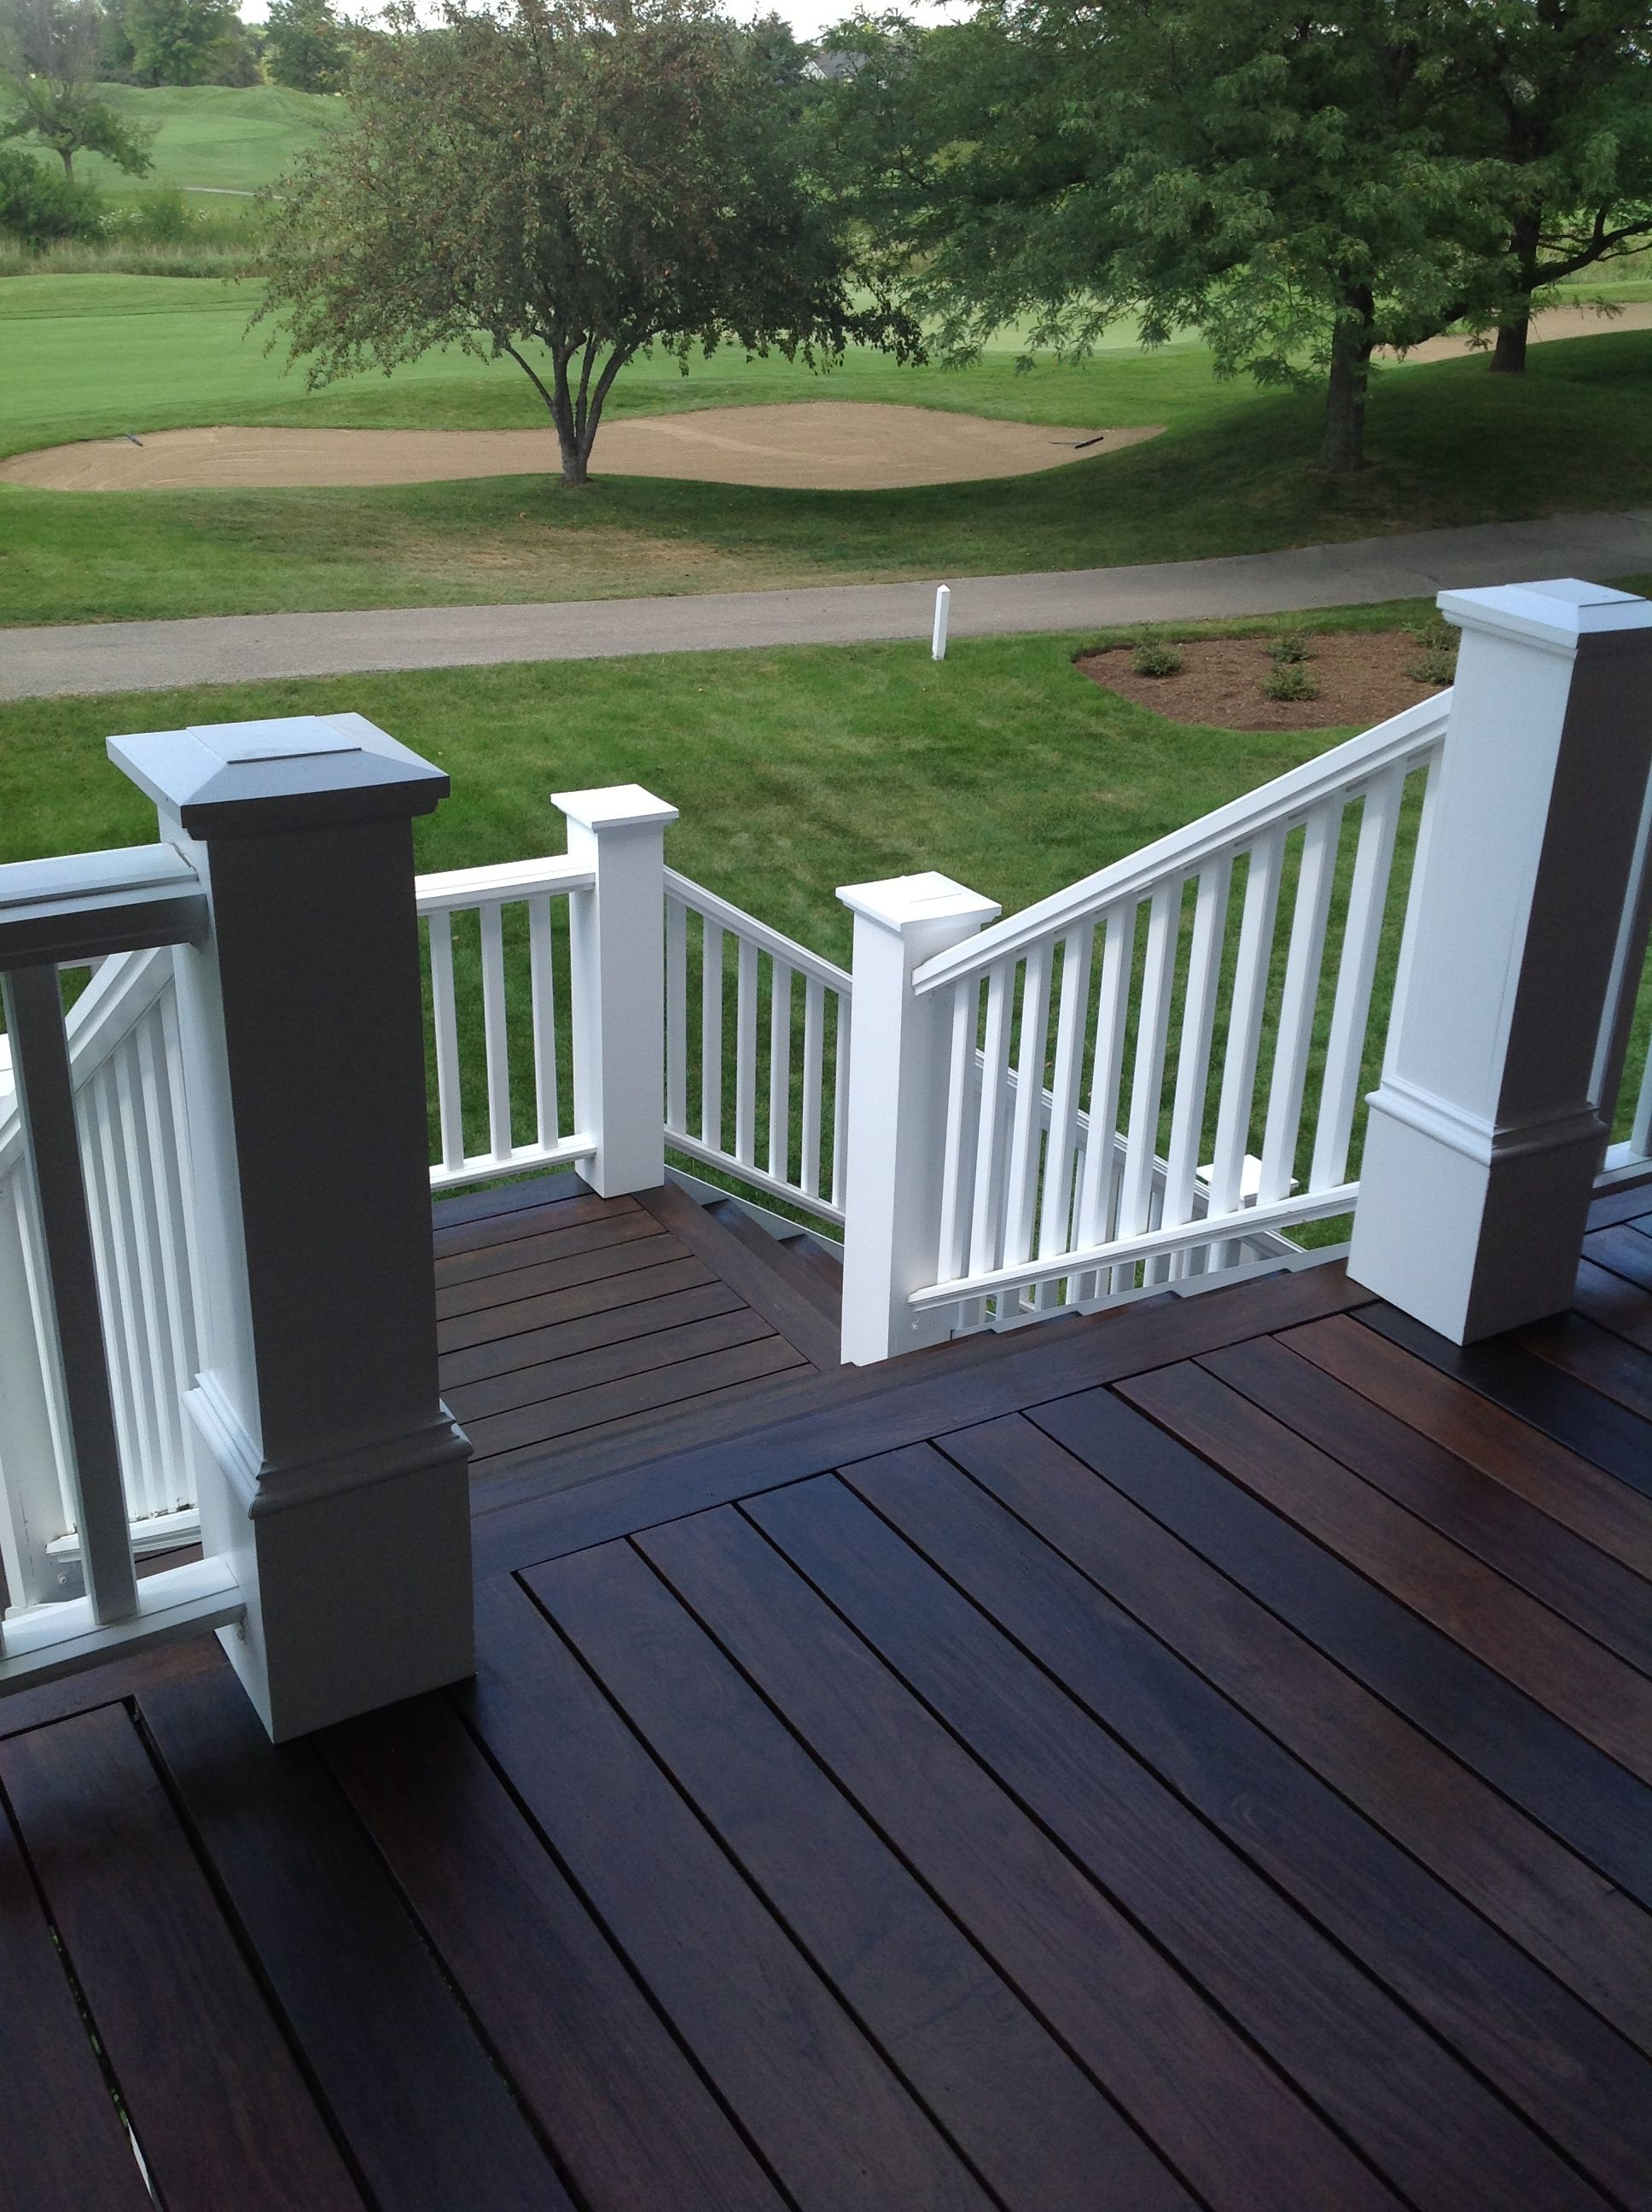 Dark Cool Deck Paint Decks And Patios In 2019 Deck Colors Deck with regard to size 1936 X 2592